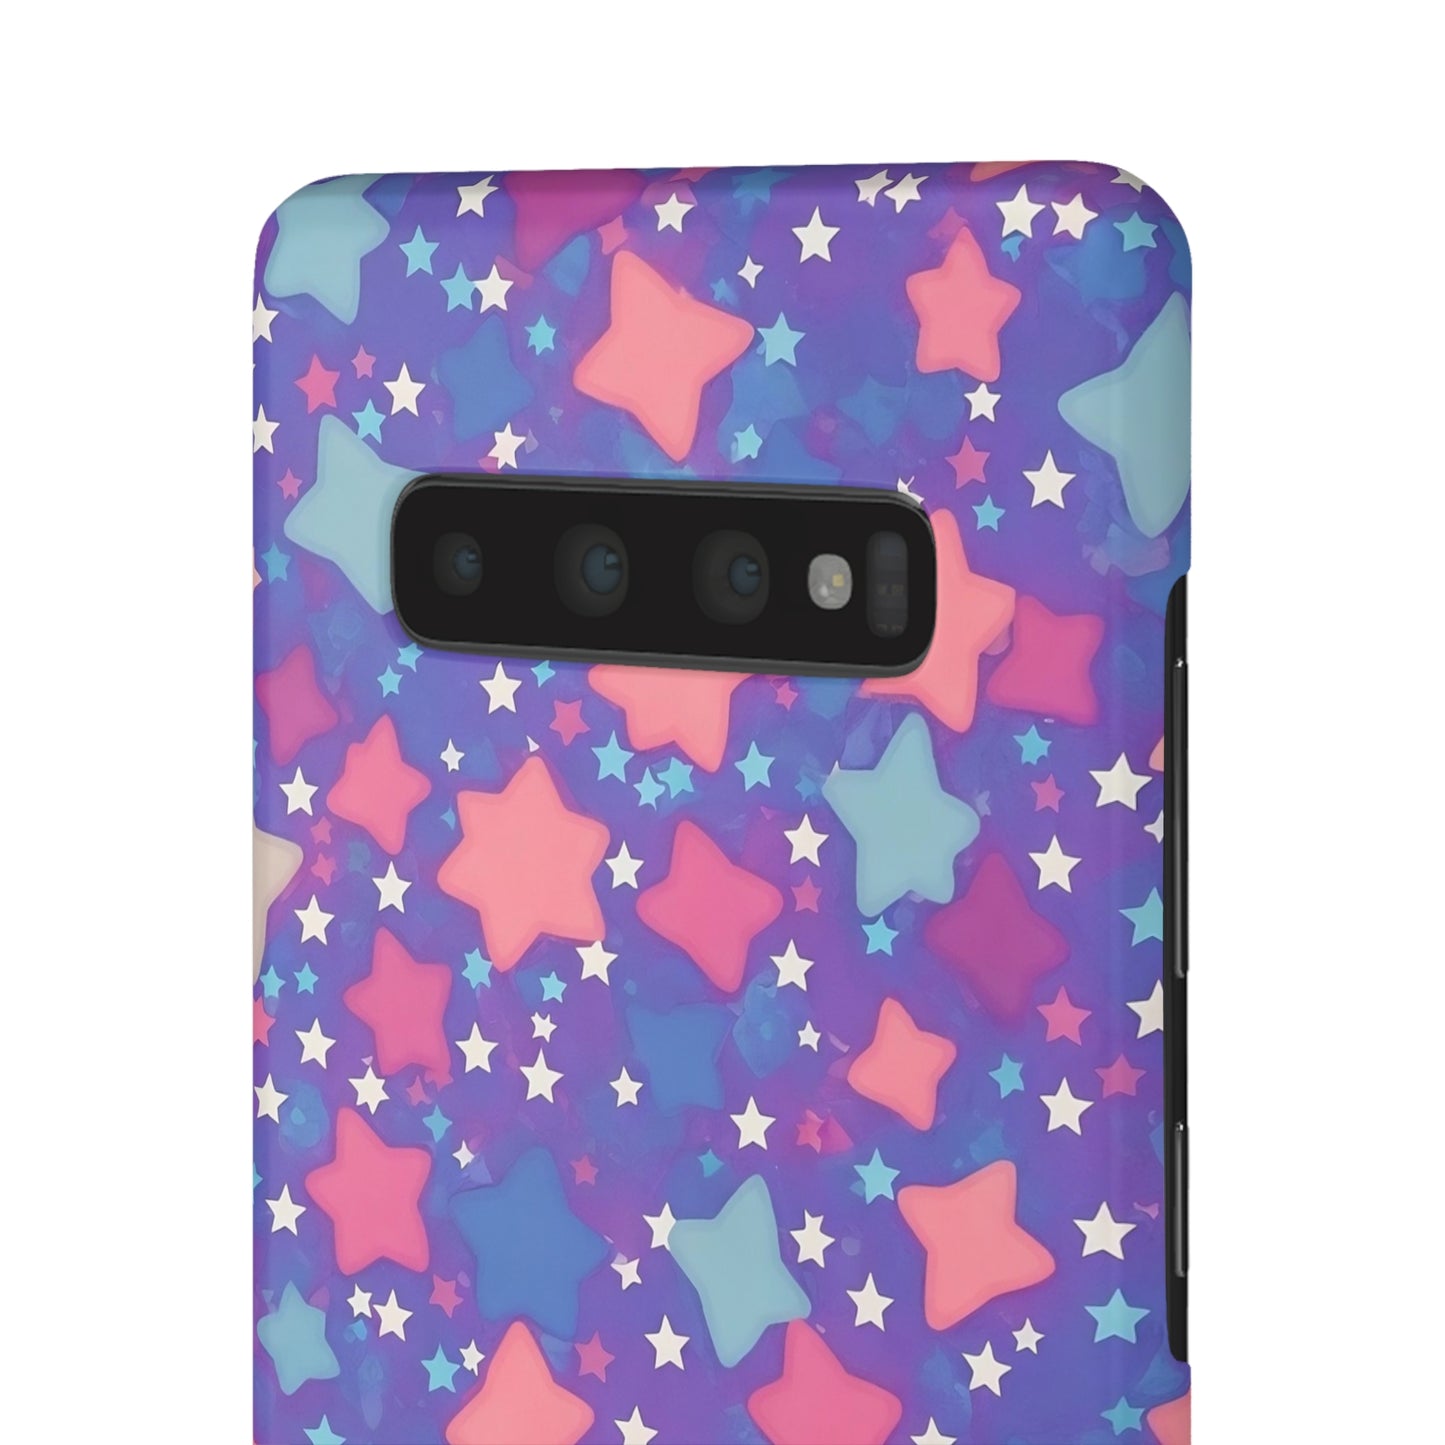 "Cosmic Sparkle" Samsung Snap Cases